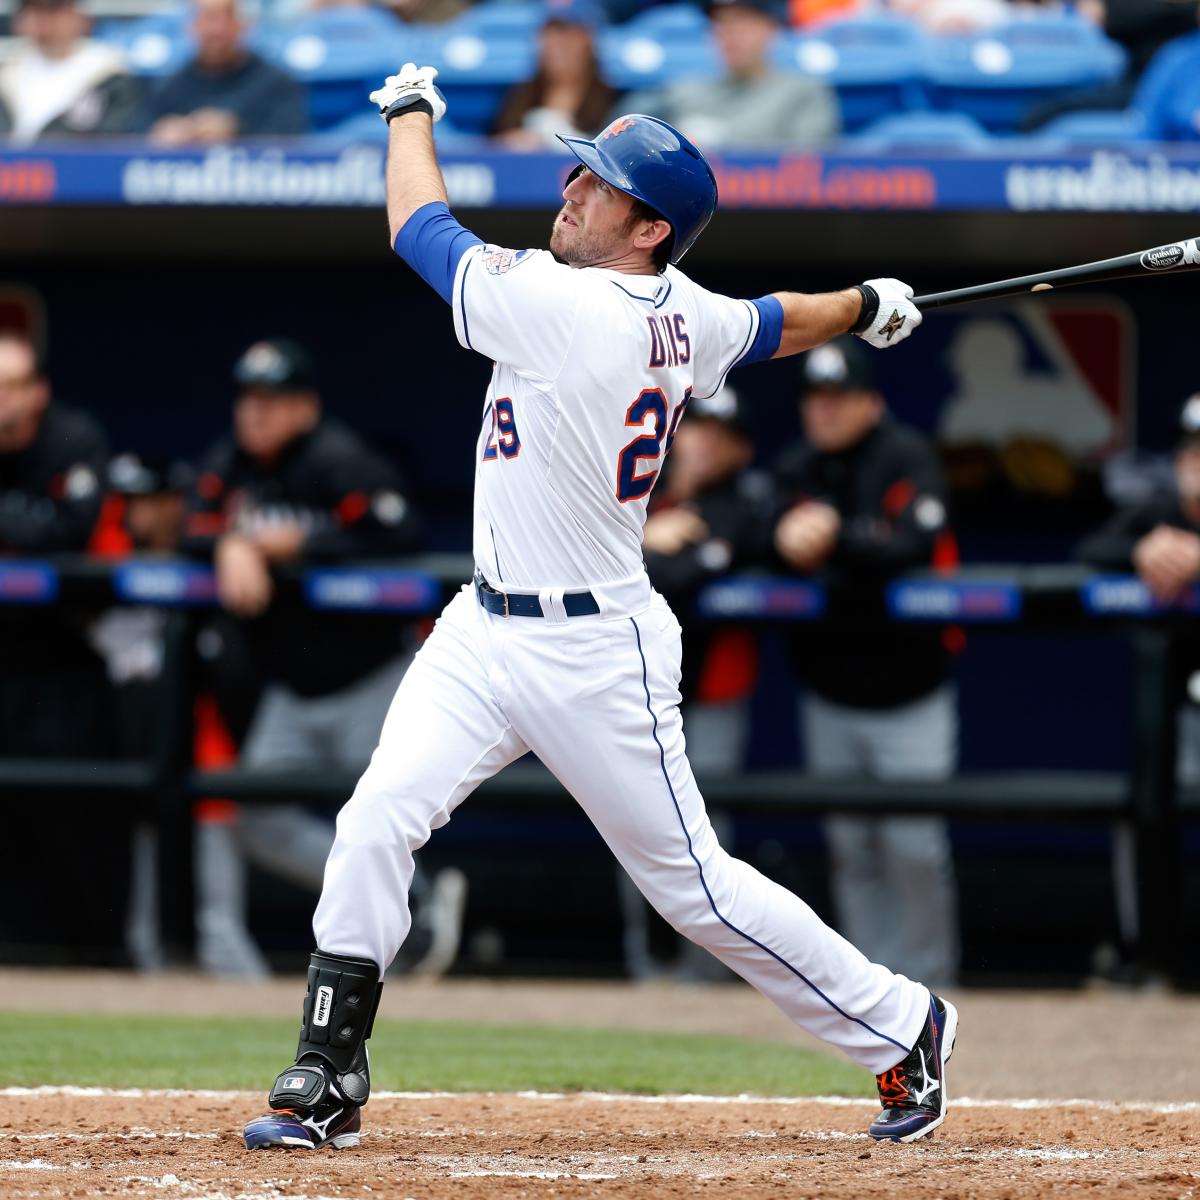 The Tao of Ike Davis: Mets slugger likes to keep things simple at